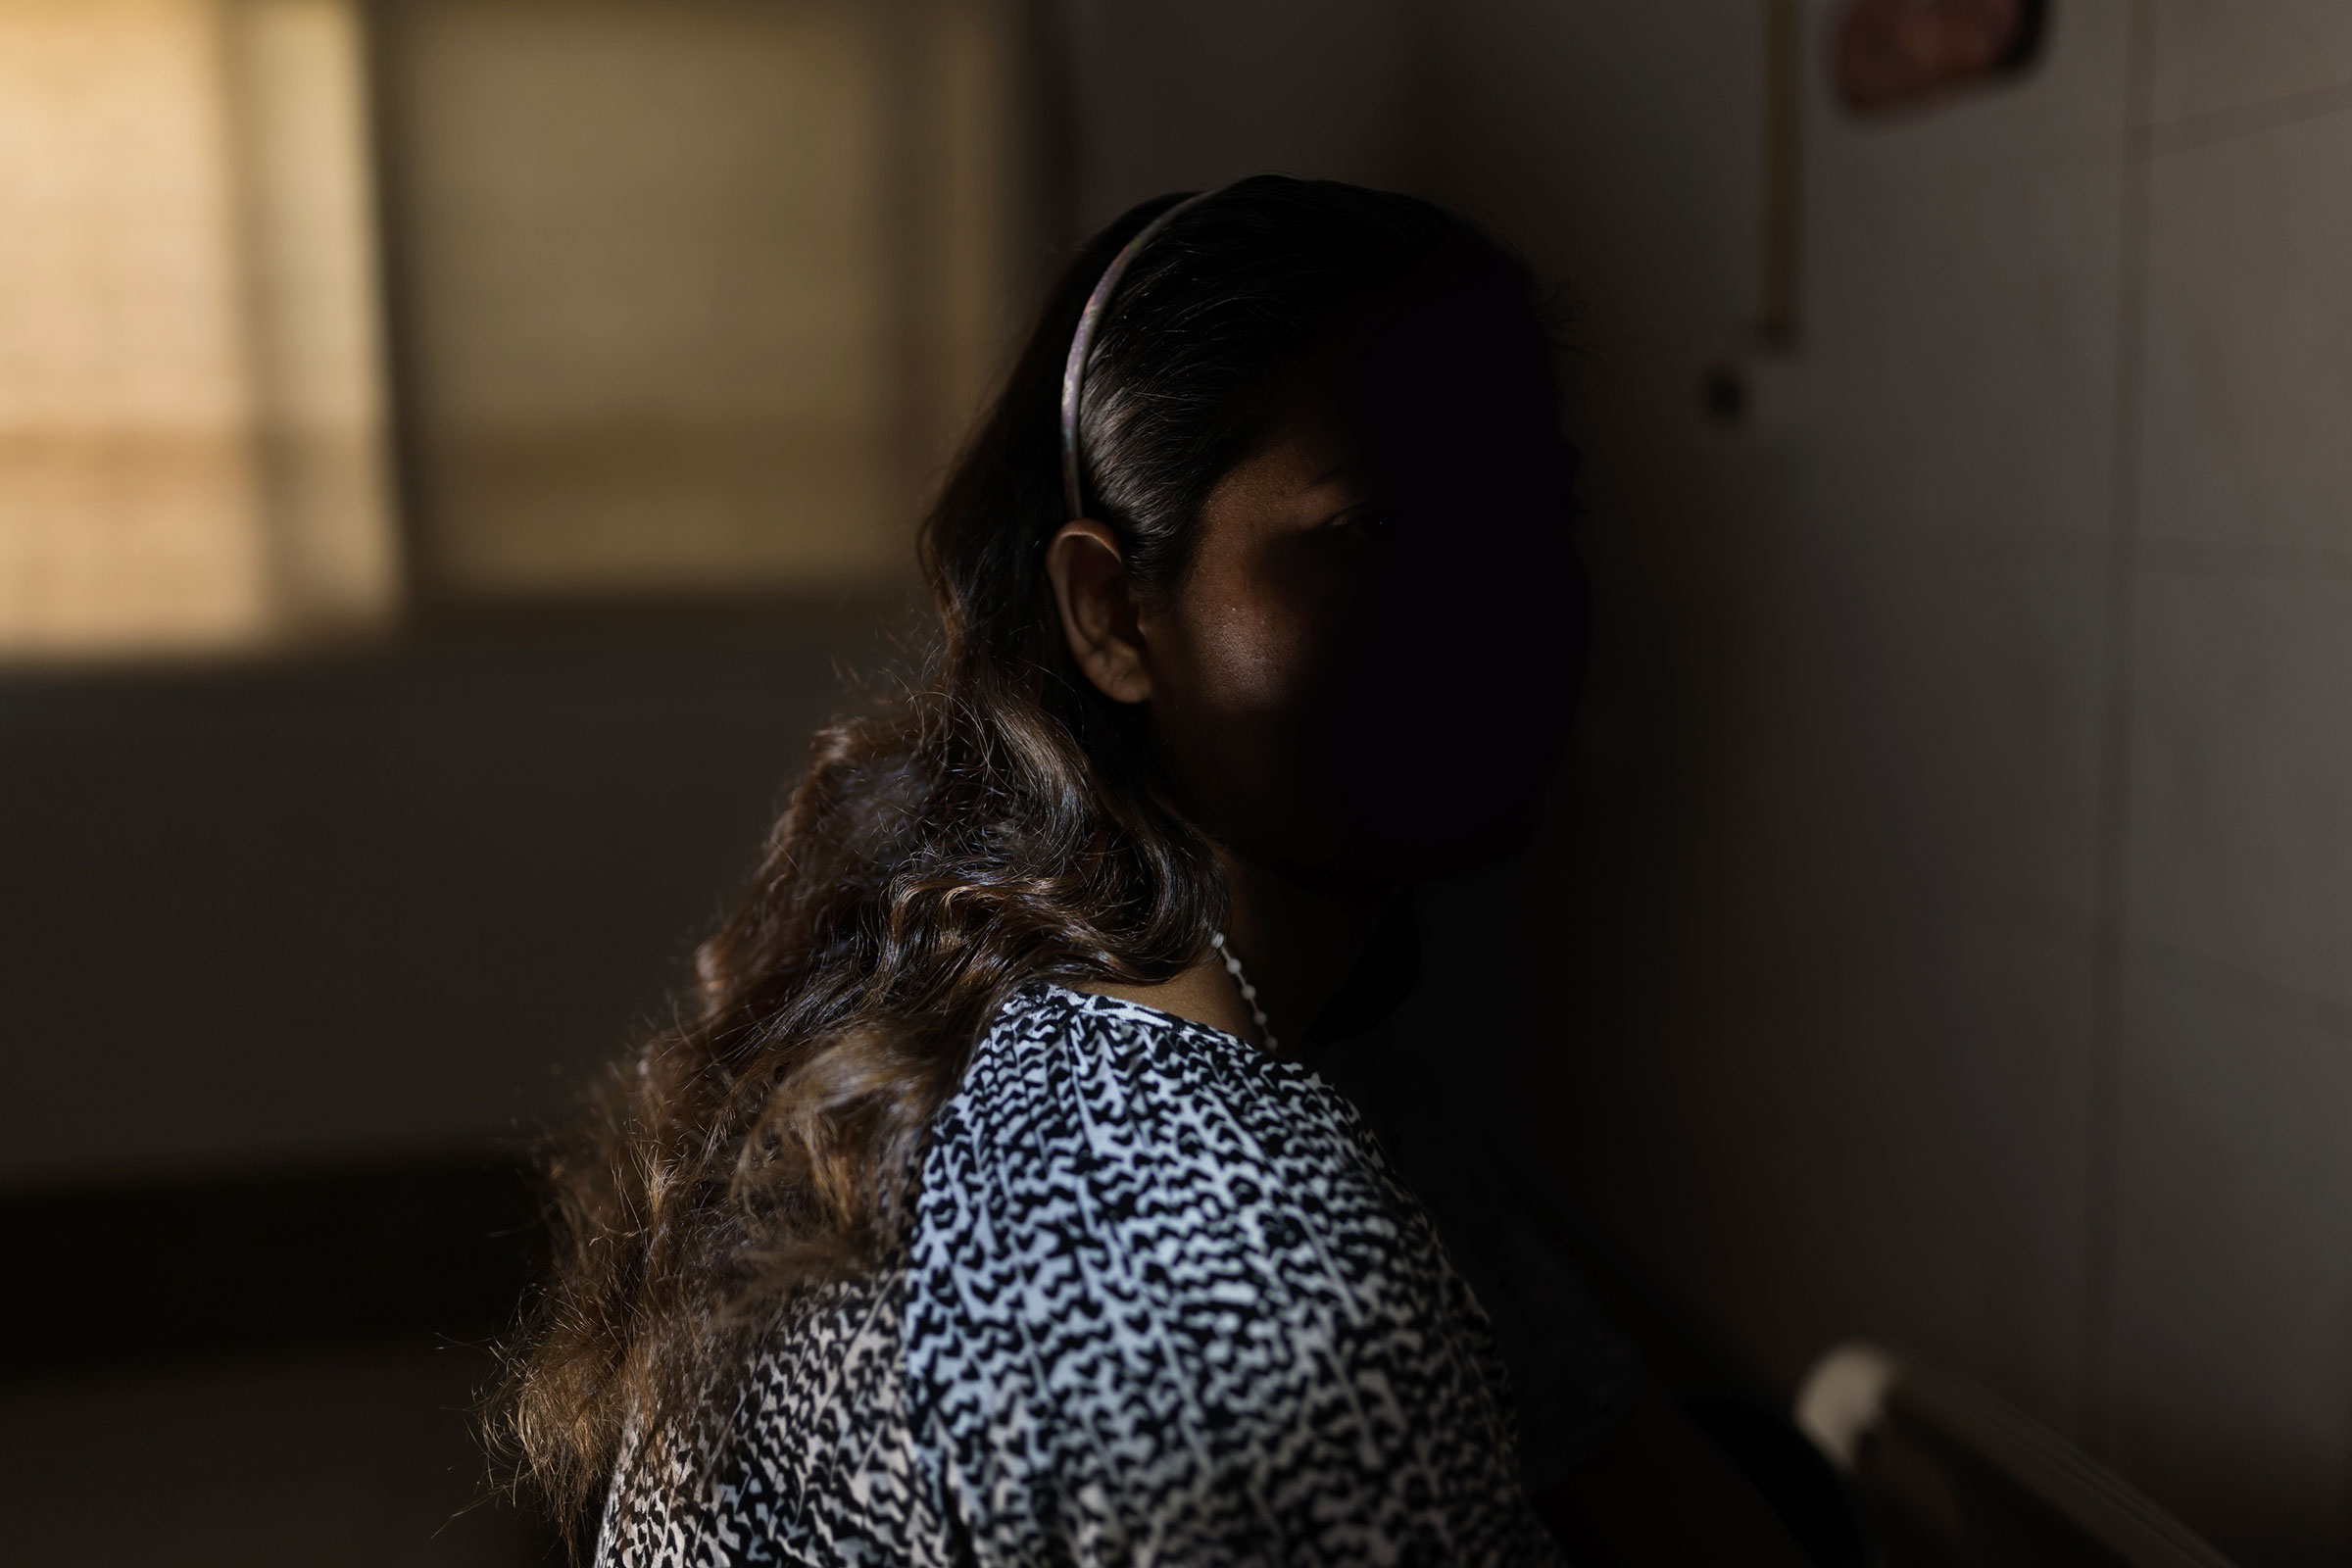 Pinky Macwan lost her garment-factory job during the pandemic; she wants to use the money she’ll make from surrogacy to start her own business. (Smita Sharma for TIME)